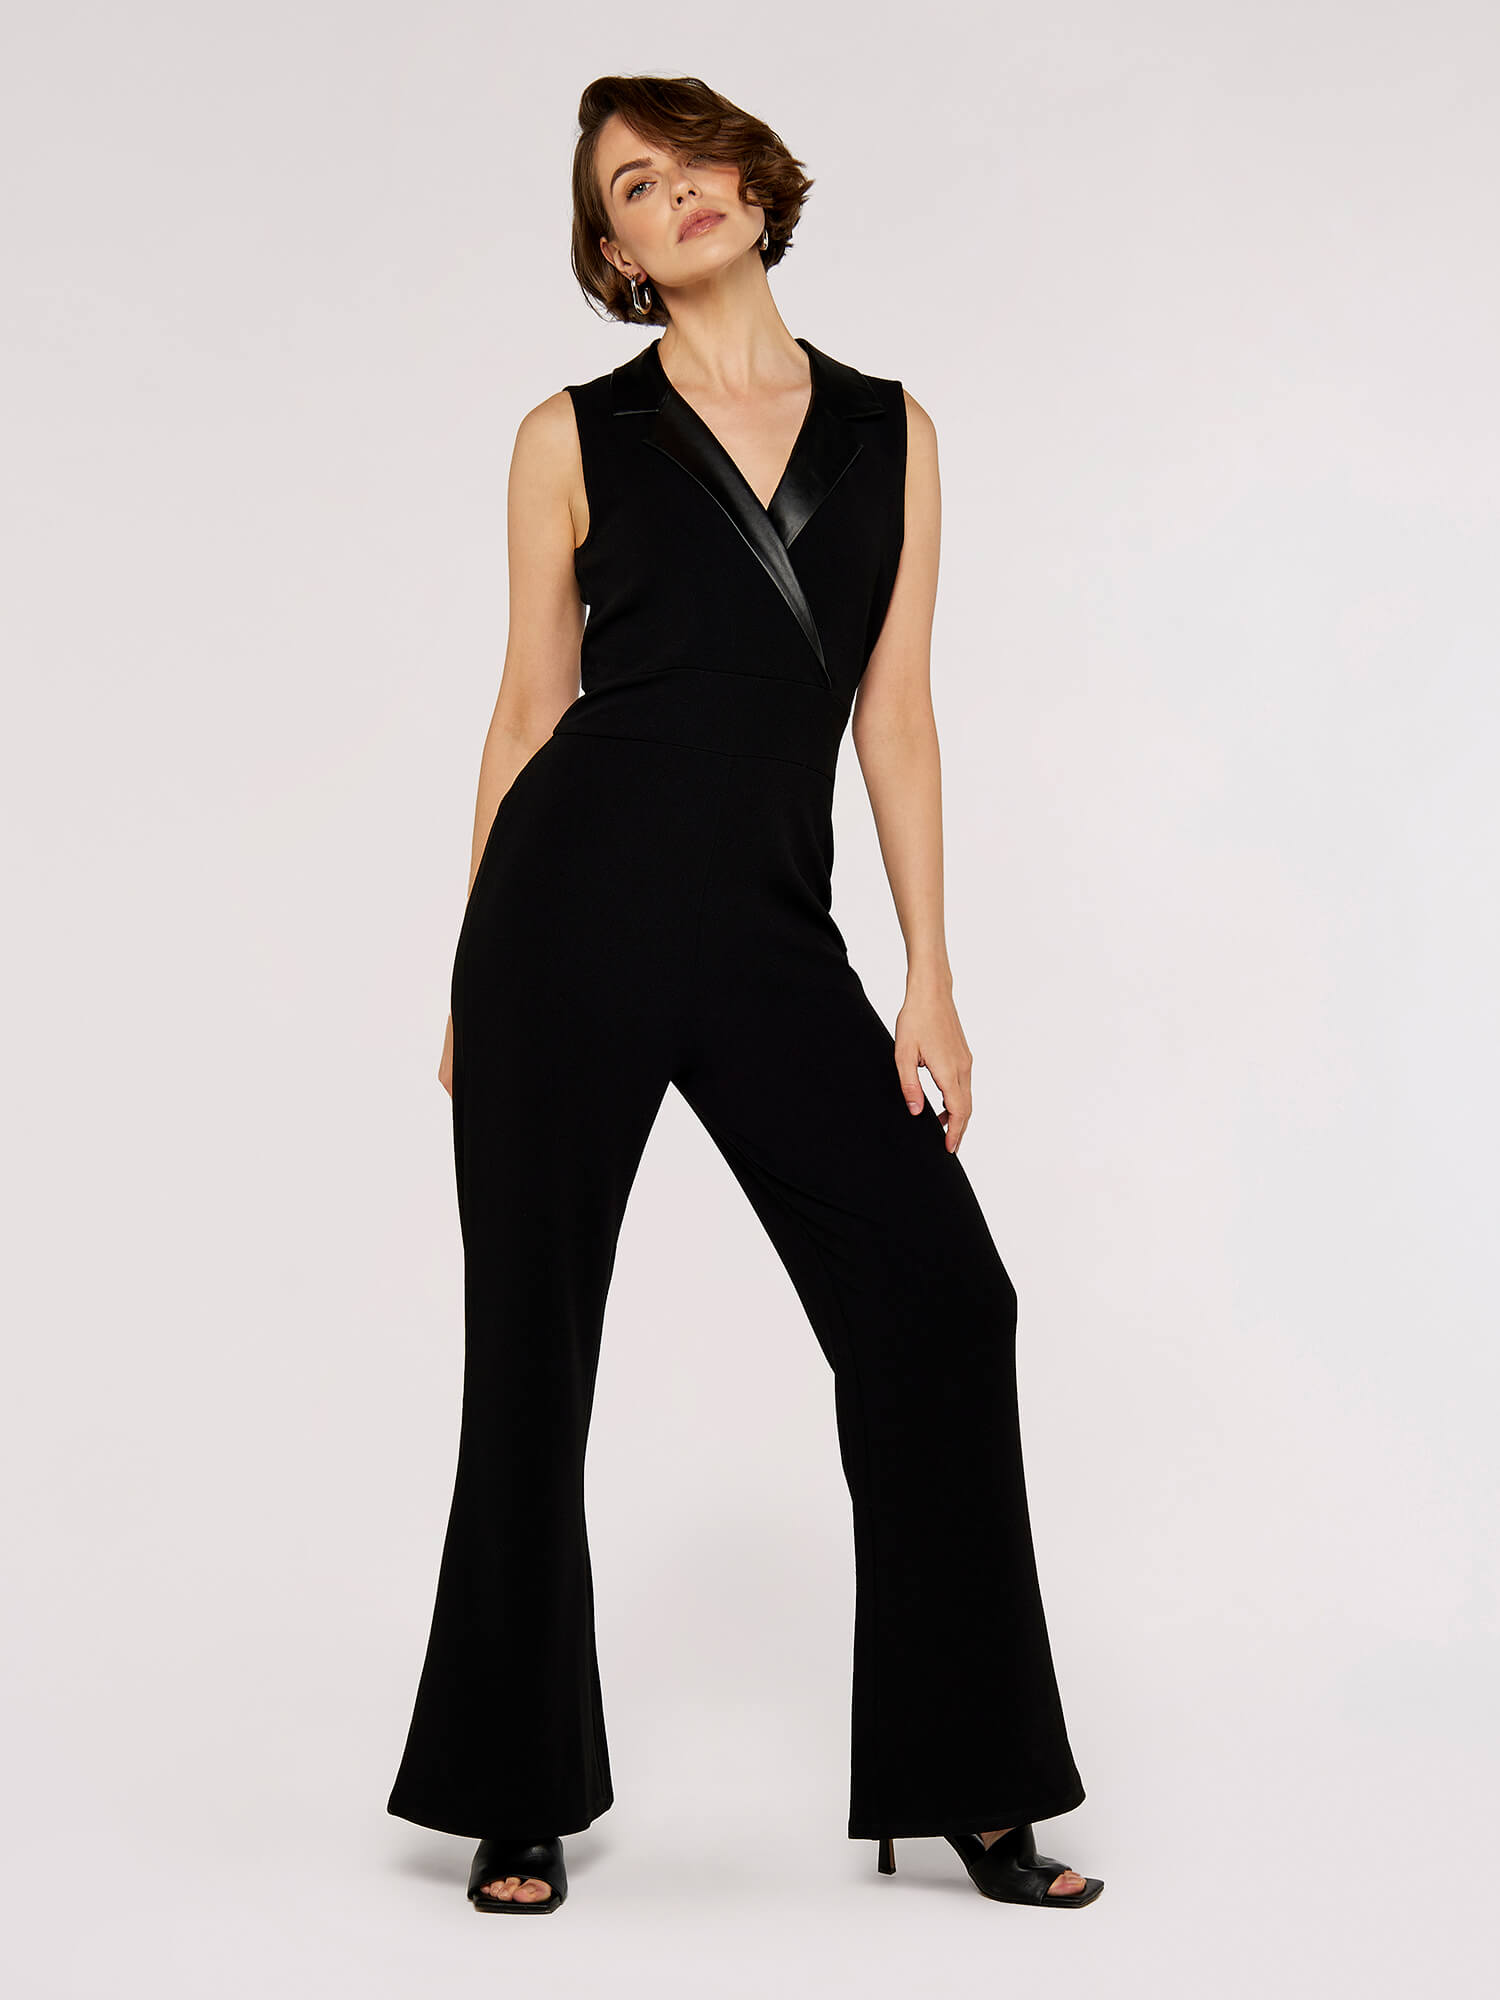 Leather-Look Collar Flare Jumpsuit | Apricot Clothing